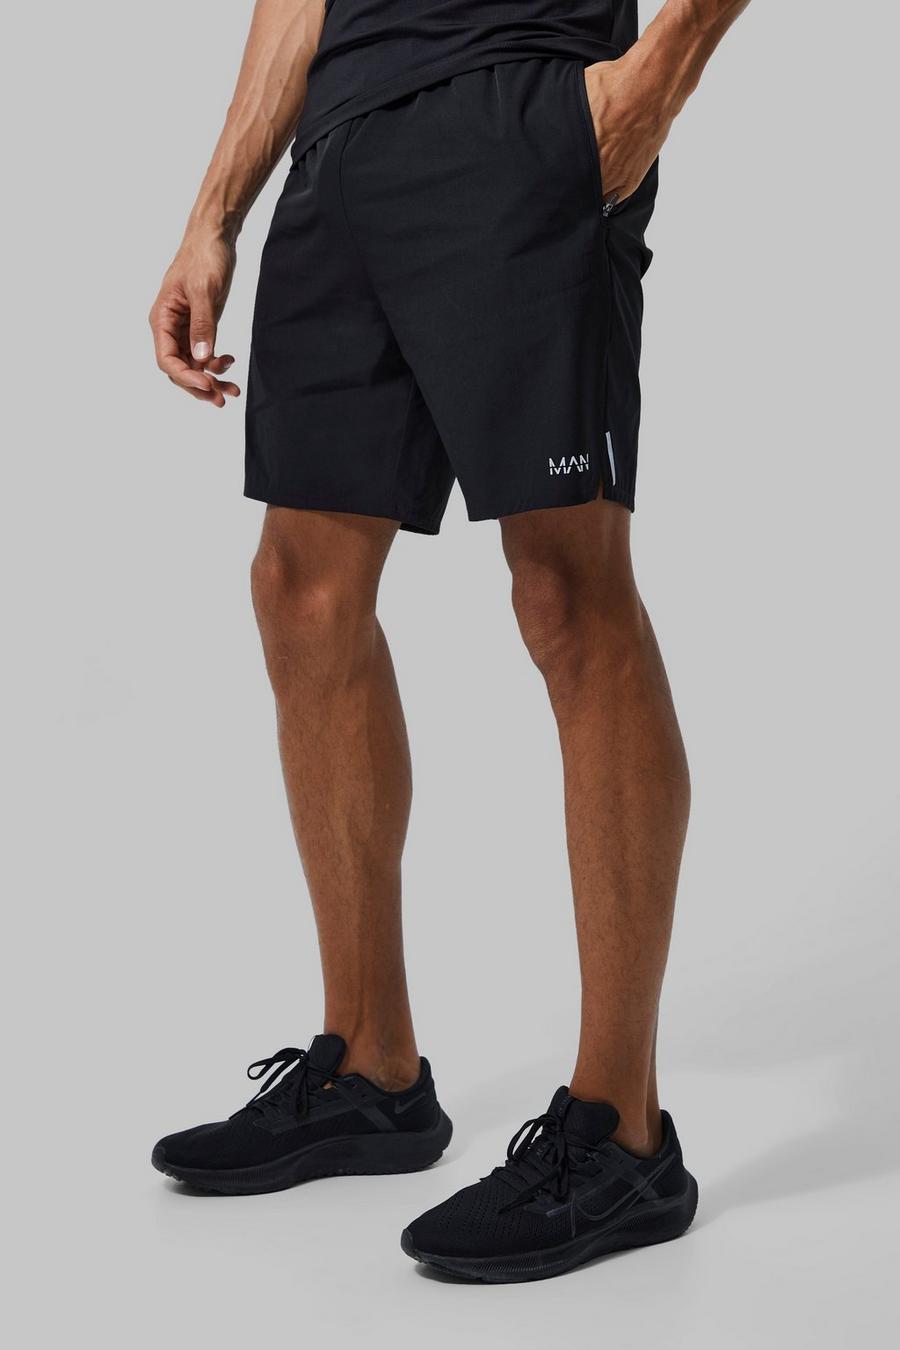 Black Tall Dunne Man Active Performance Shorts image number 1